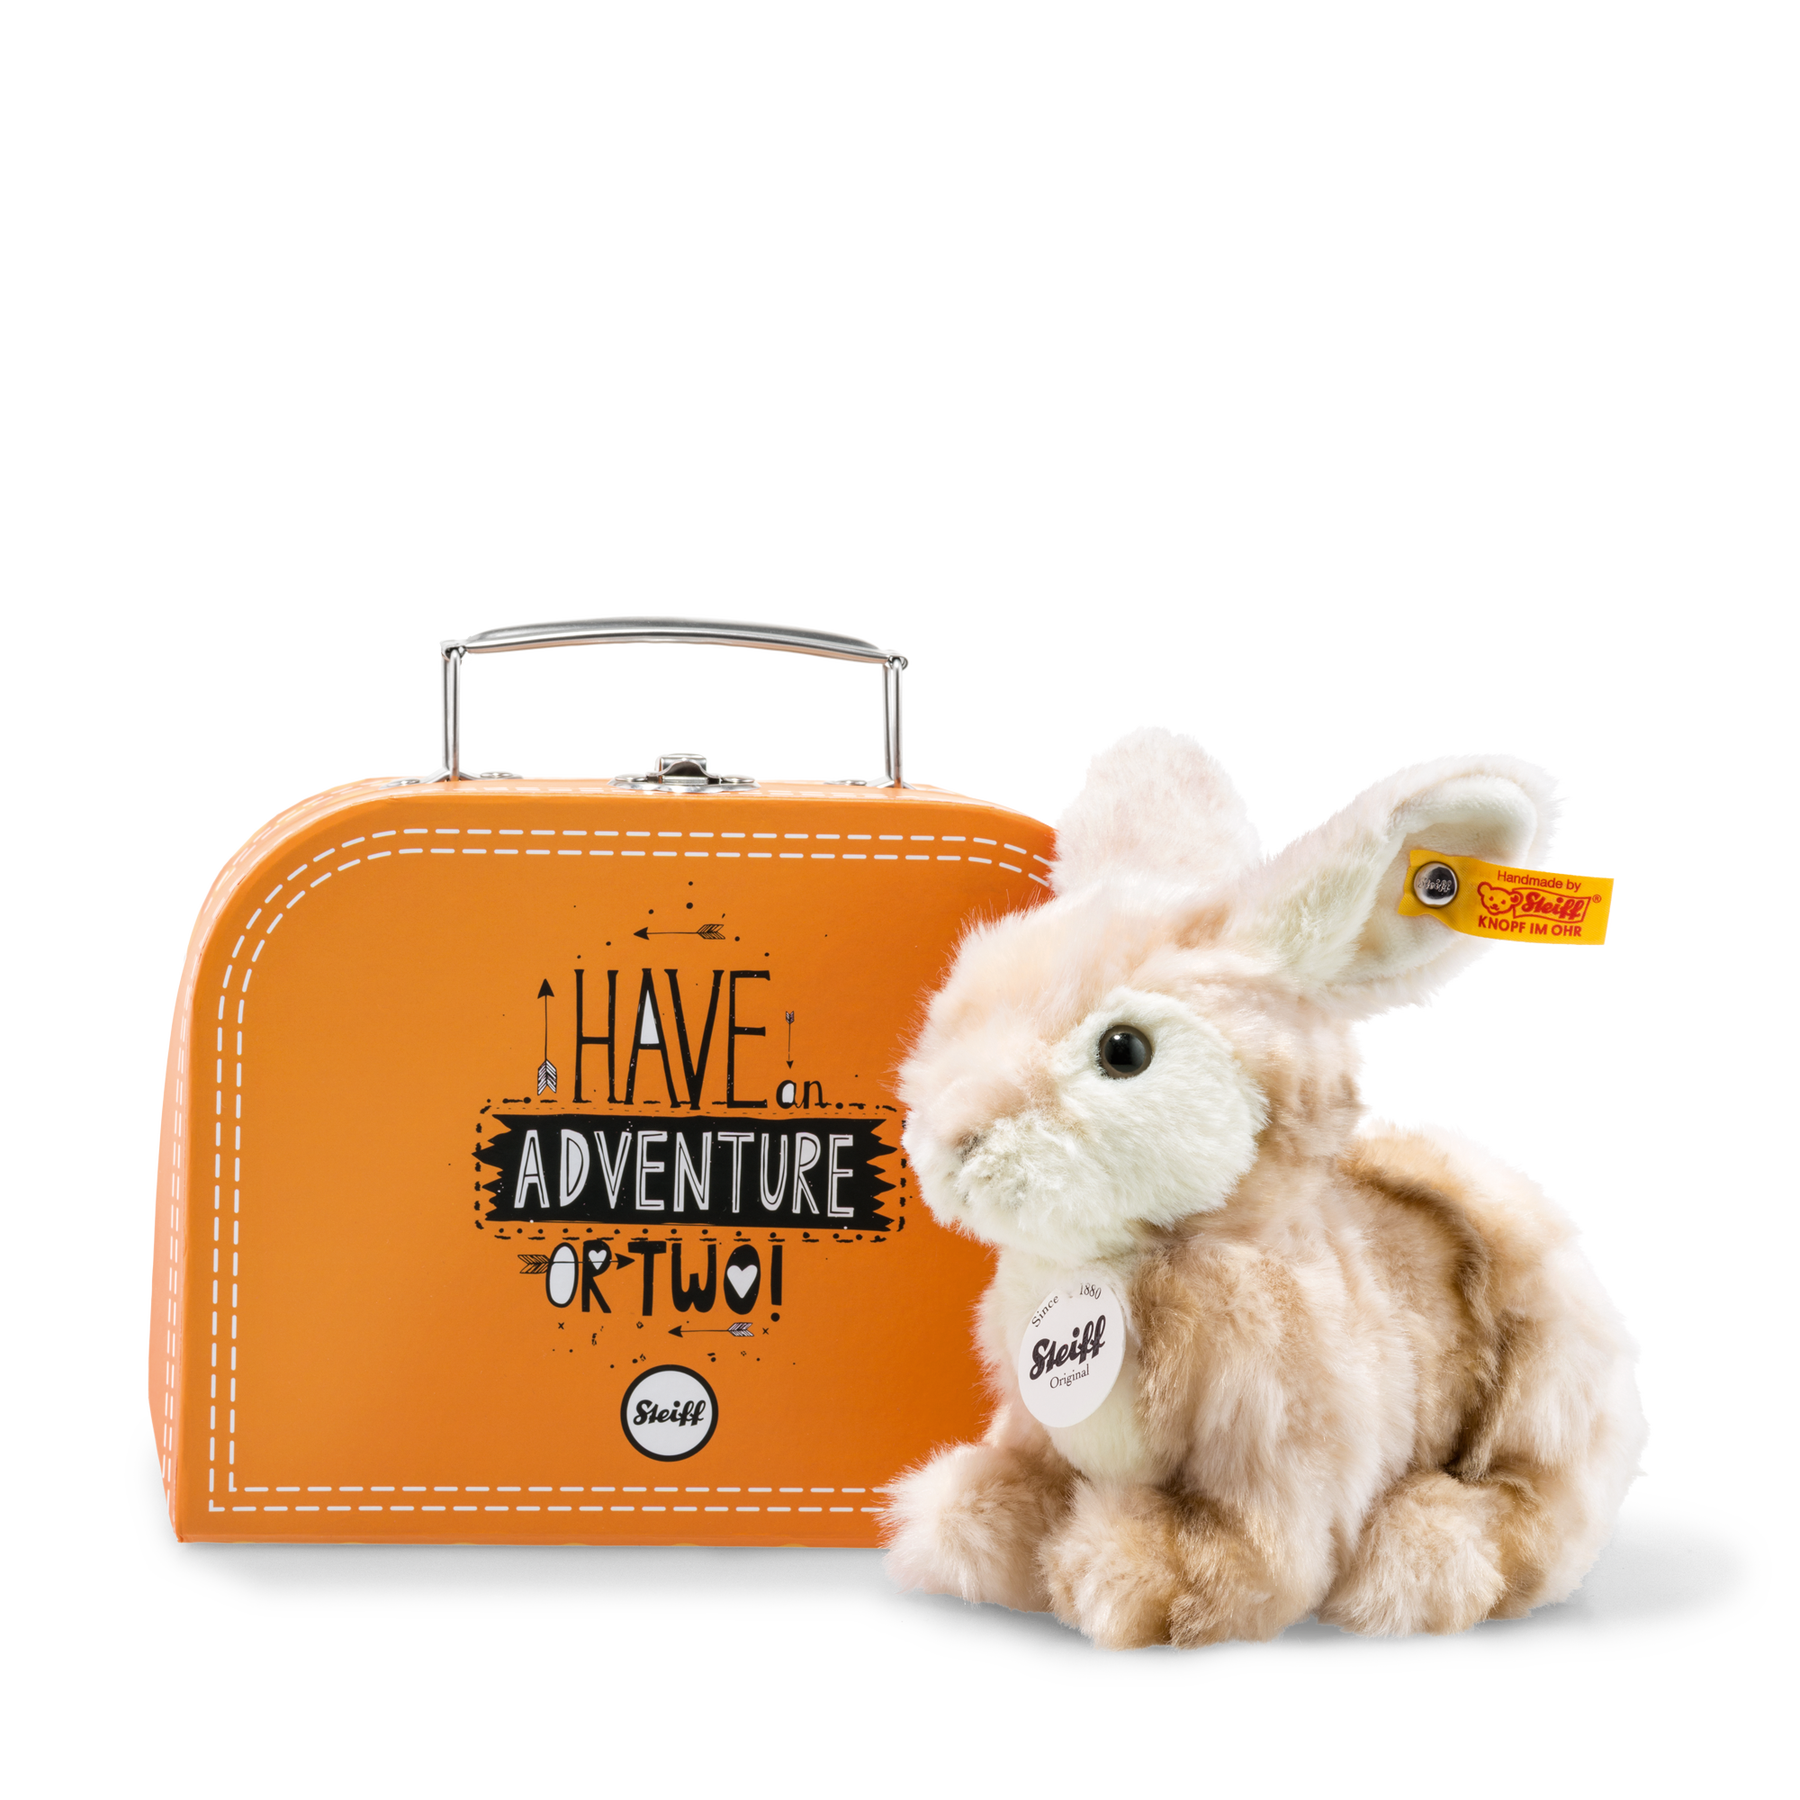 Melly rabbit in suitcase